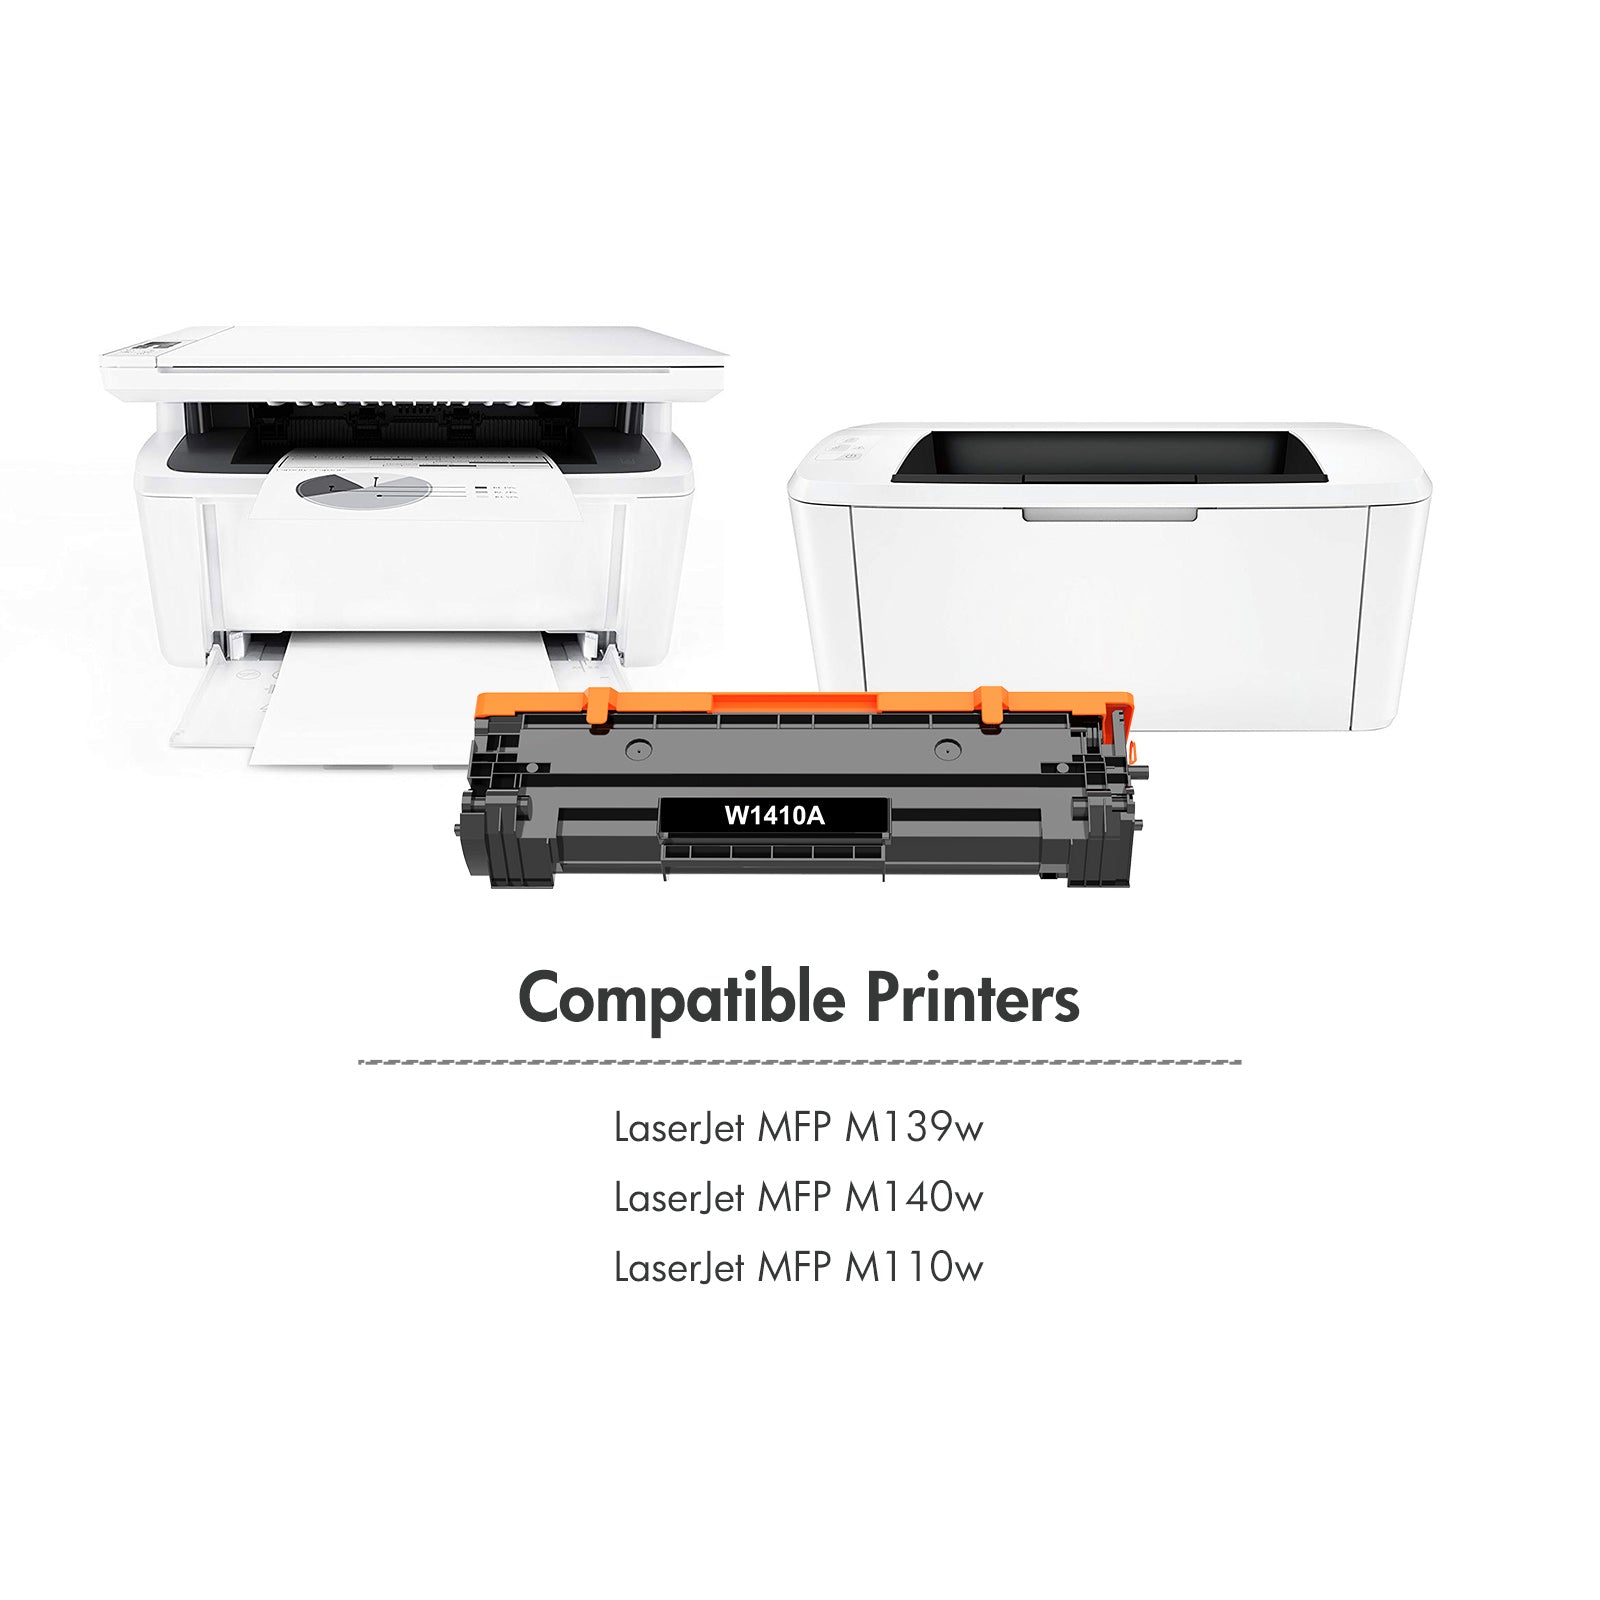 141A Toner Cartridge with Chip Compatible for HP 141A W1410A for HP LaserJet MFP M140w M139w M110w Printer (2 * Black)